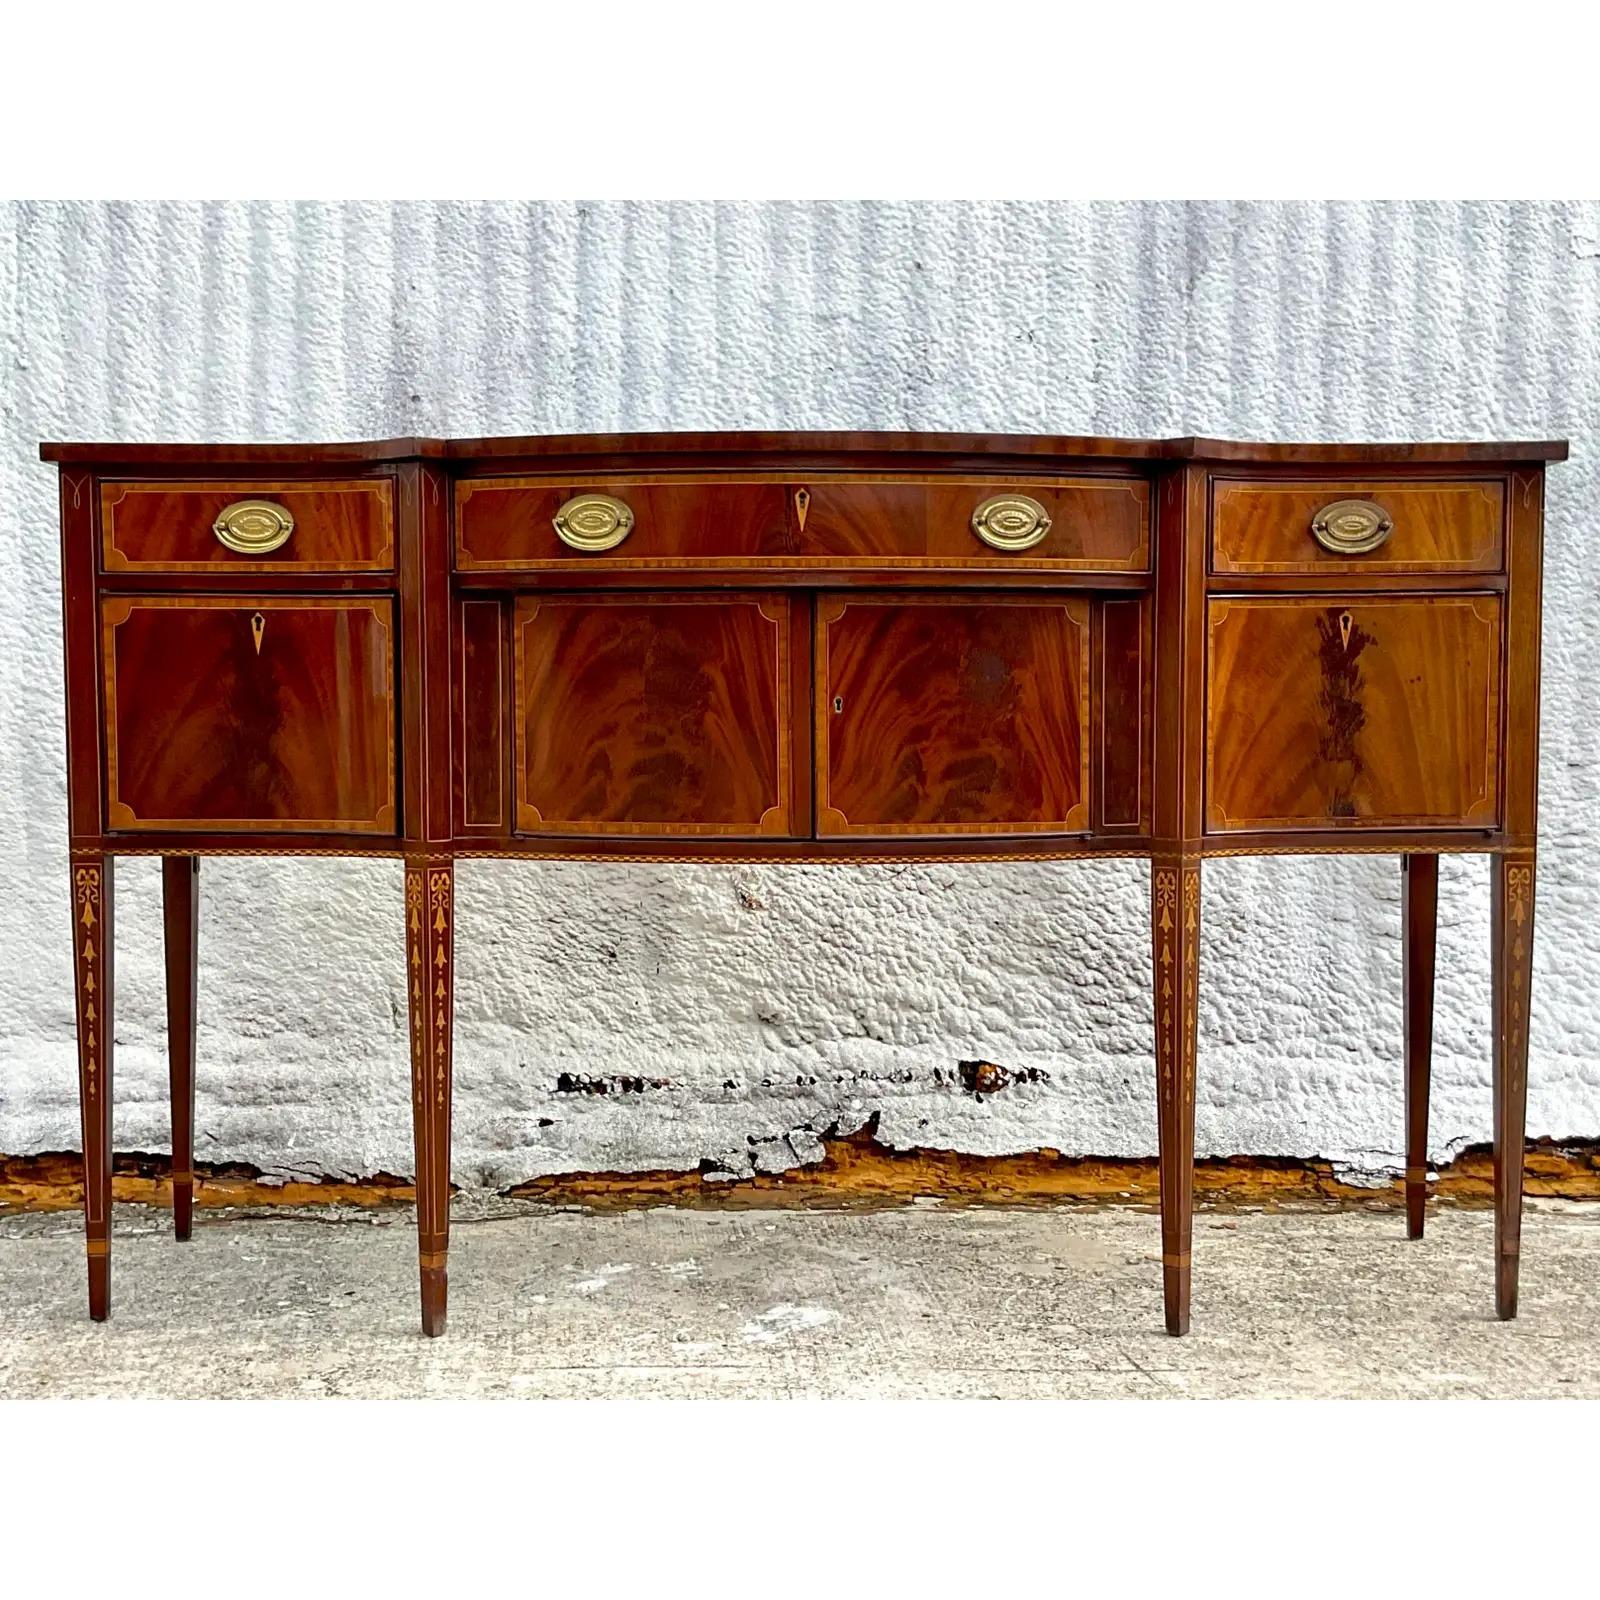 A fantastic vintage Regency tall sideboard. Made by the iconic Councill group. A beautiful flame mahogany with chic inlay detail. Acquired from a Palm Beach estate.